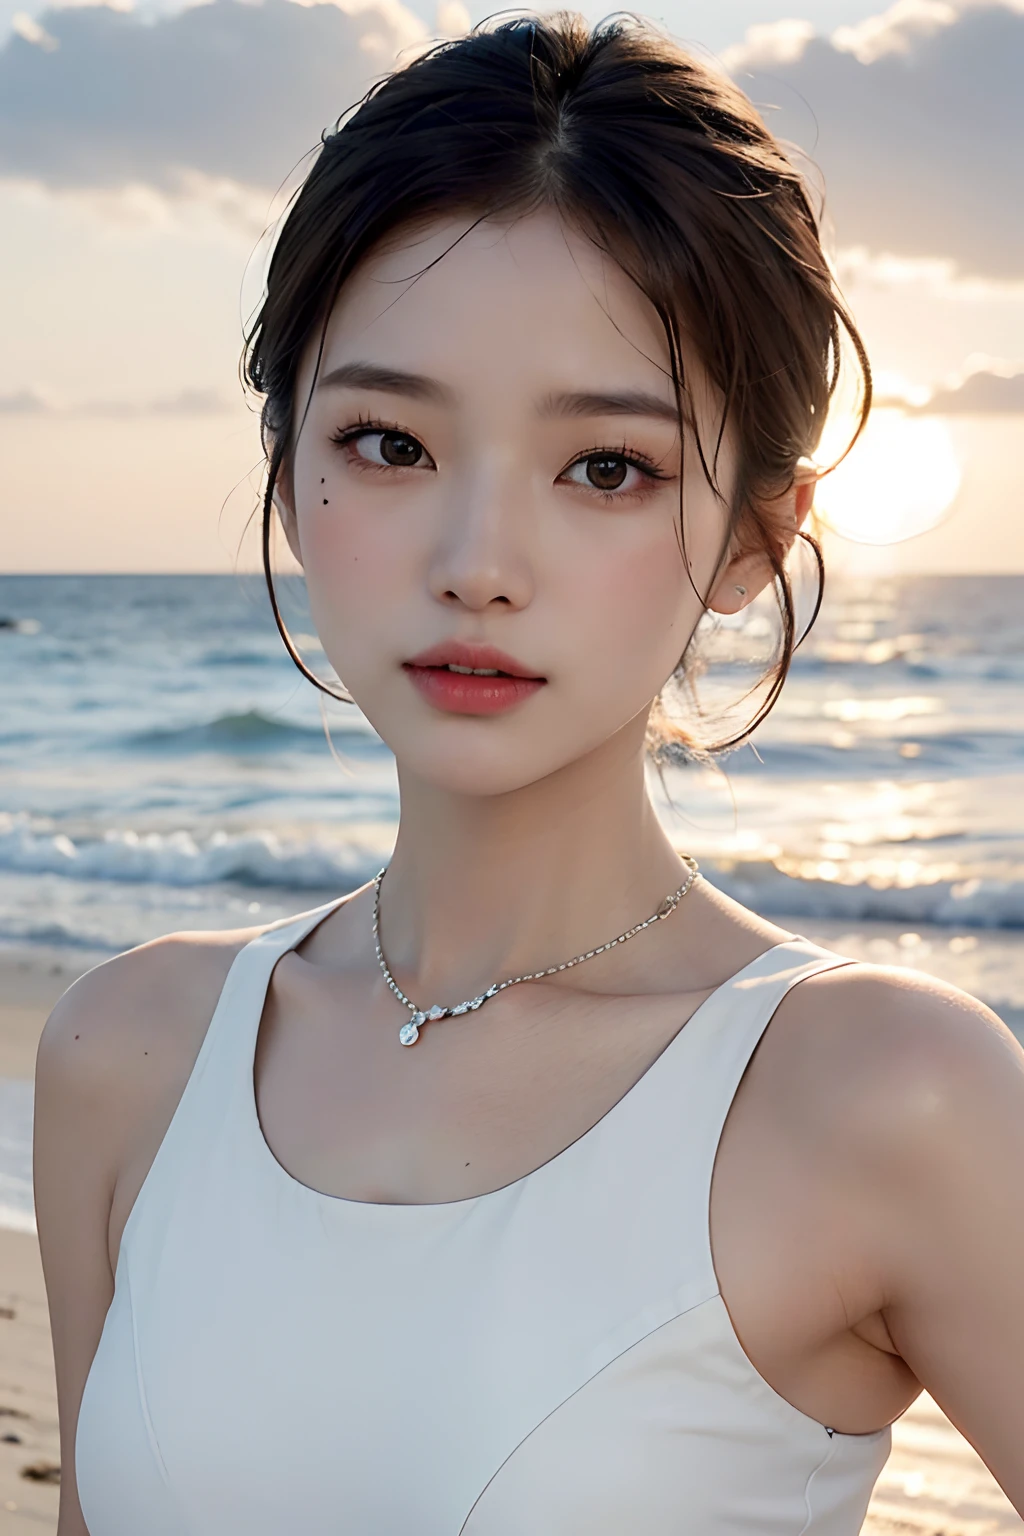 hightquality、​masterpiece、超A high resolution、((Asian beauty face))、Beautiful adult woman、a closeup、Thin makeup、ssmile、Light brown short-cut hair、Small necklace、White sleeveless shirt、Cloudy seaside、Rough seas、cloudiness、strong breeze、black clouds、